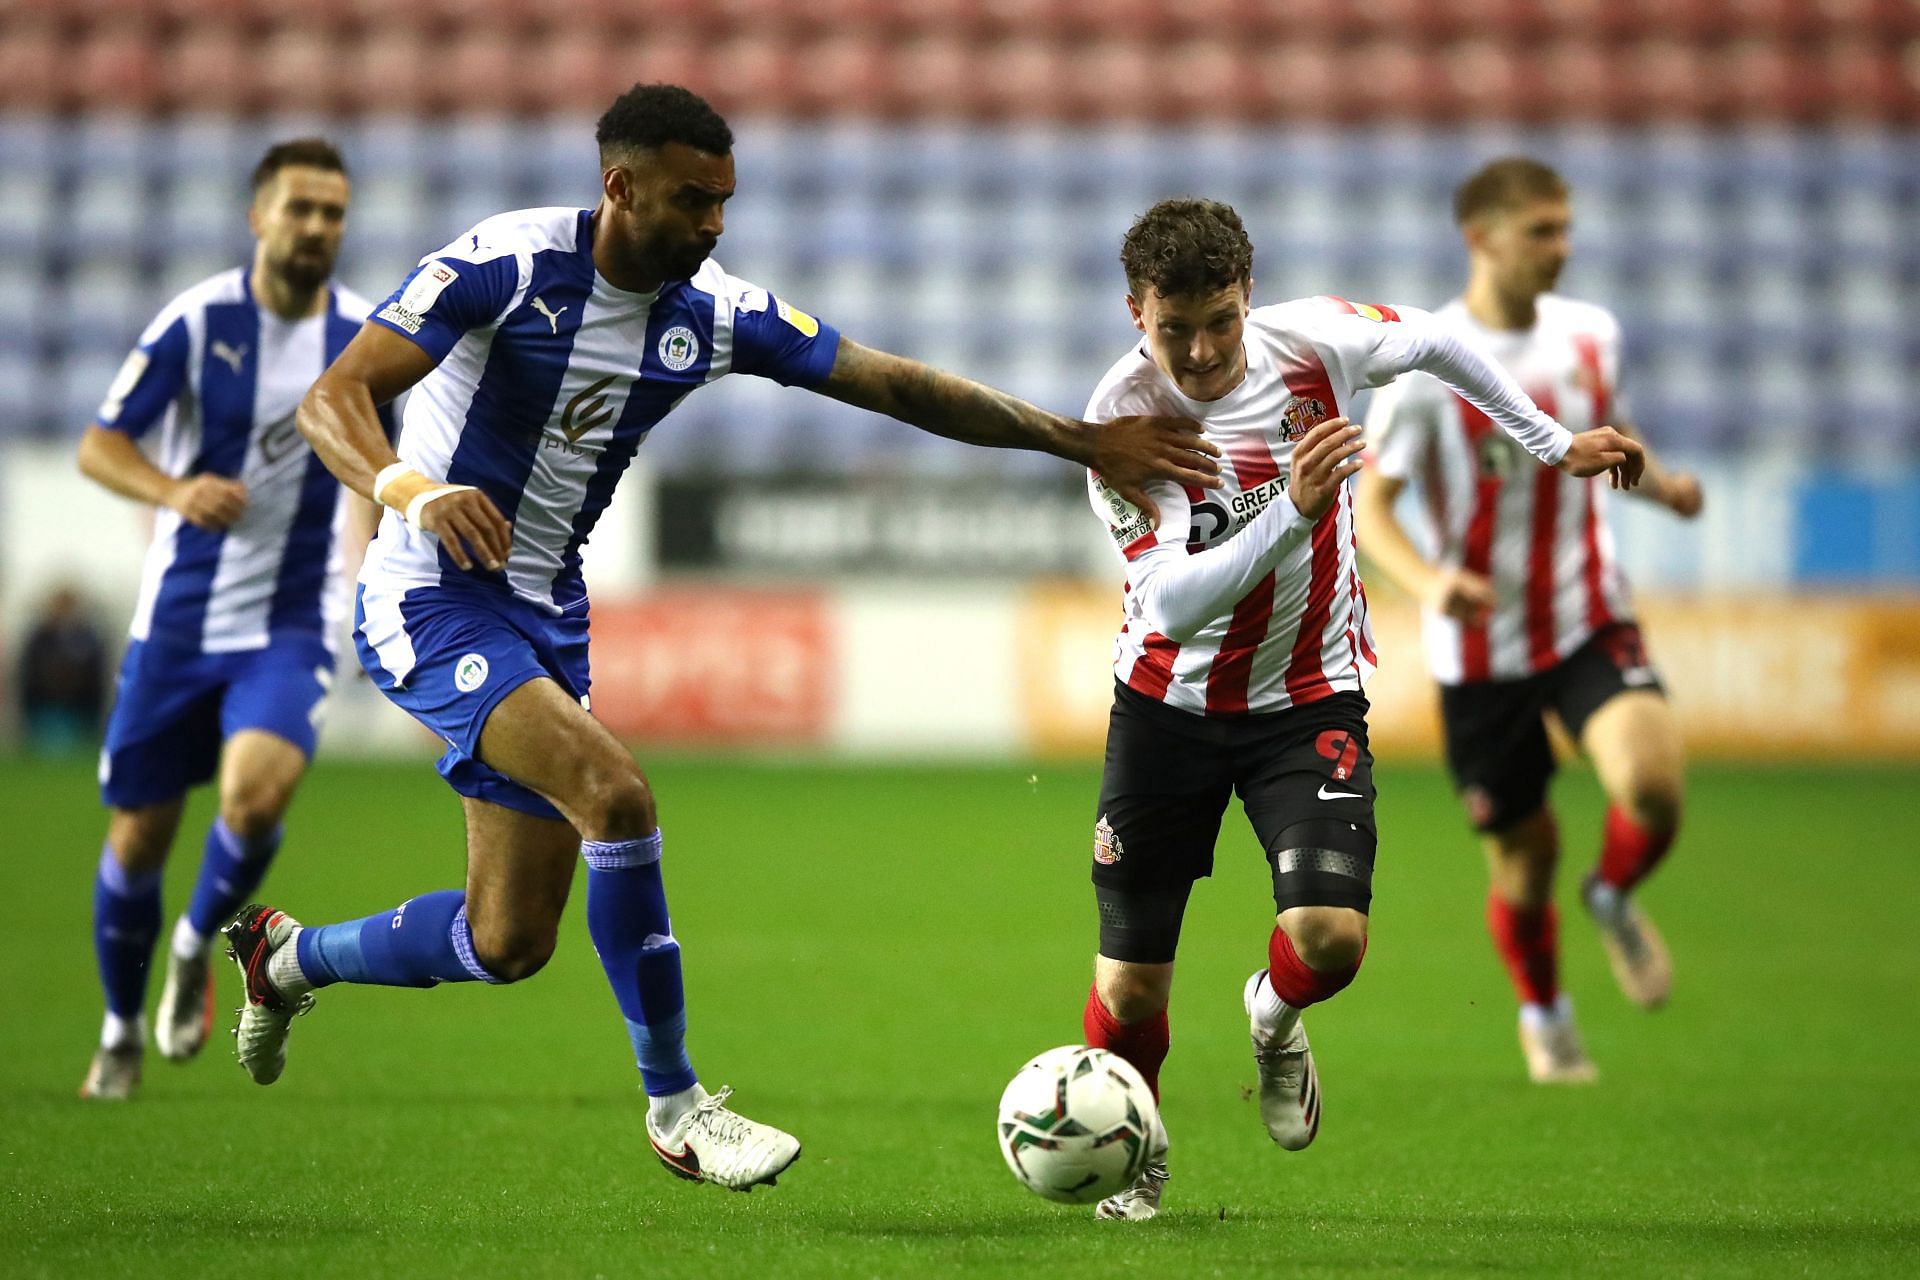 Sunderland are looking for their third consecutive win over Wigan